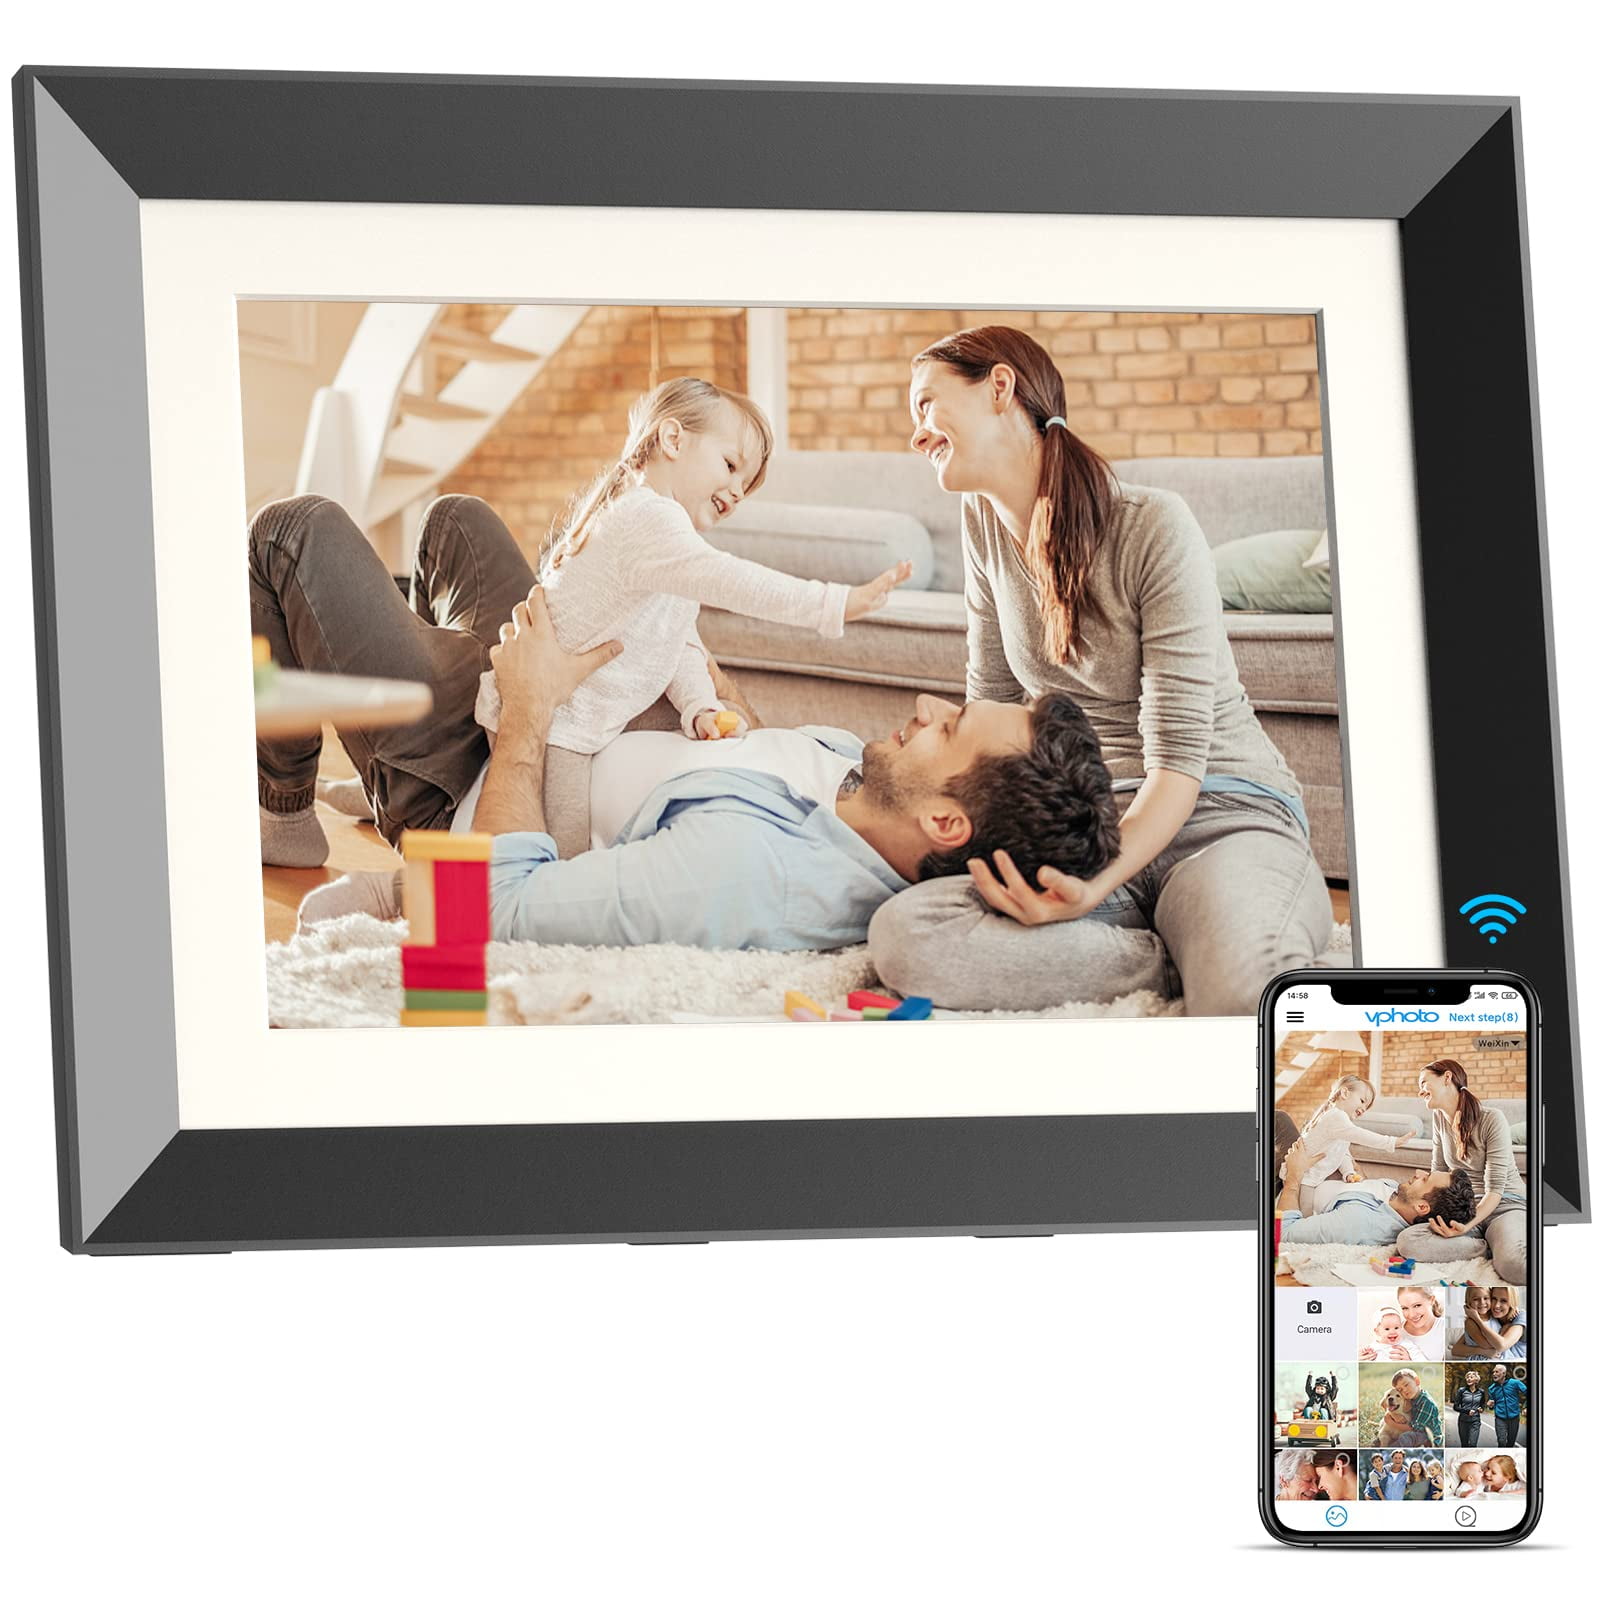 10.1-inch FHD IPS 2.4G+5.0G WiFi Digital Photo Frame 32GB Digital Picture  Frame, 1080P, Touch Screen, Full Function, Motion Sensor, Share Photos or  Videos via APP or Email, Unlimited Cloud Storage